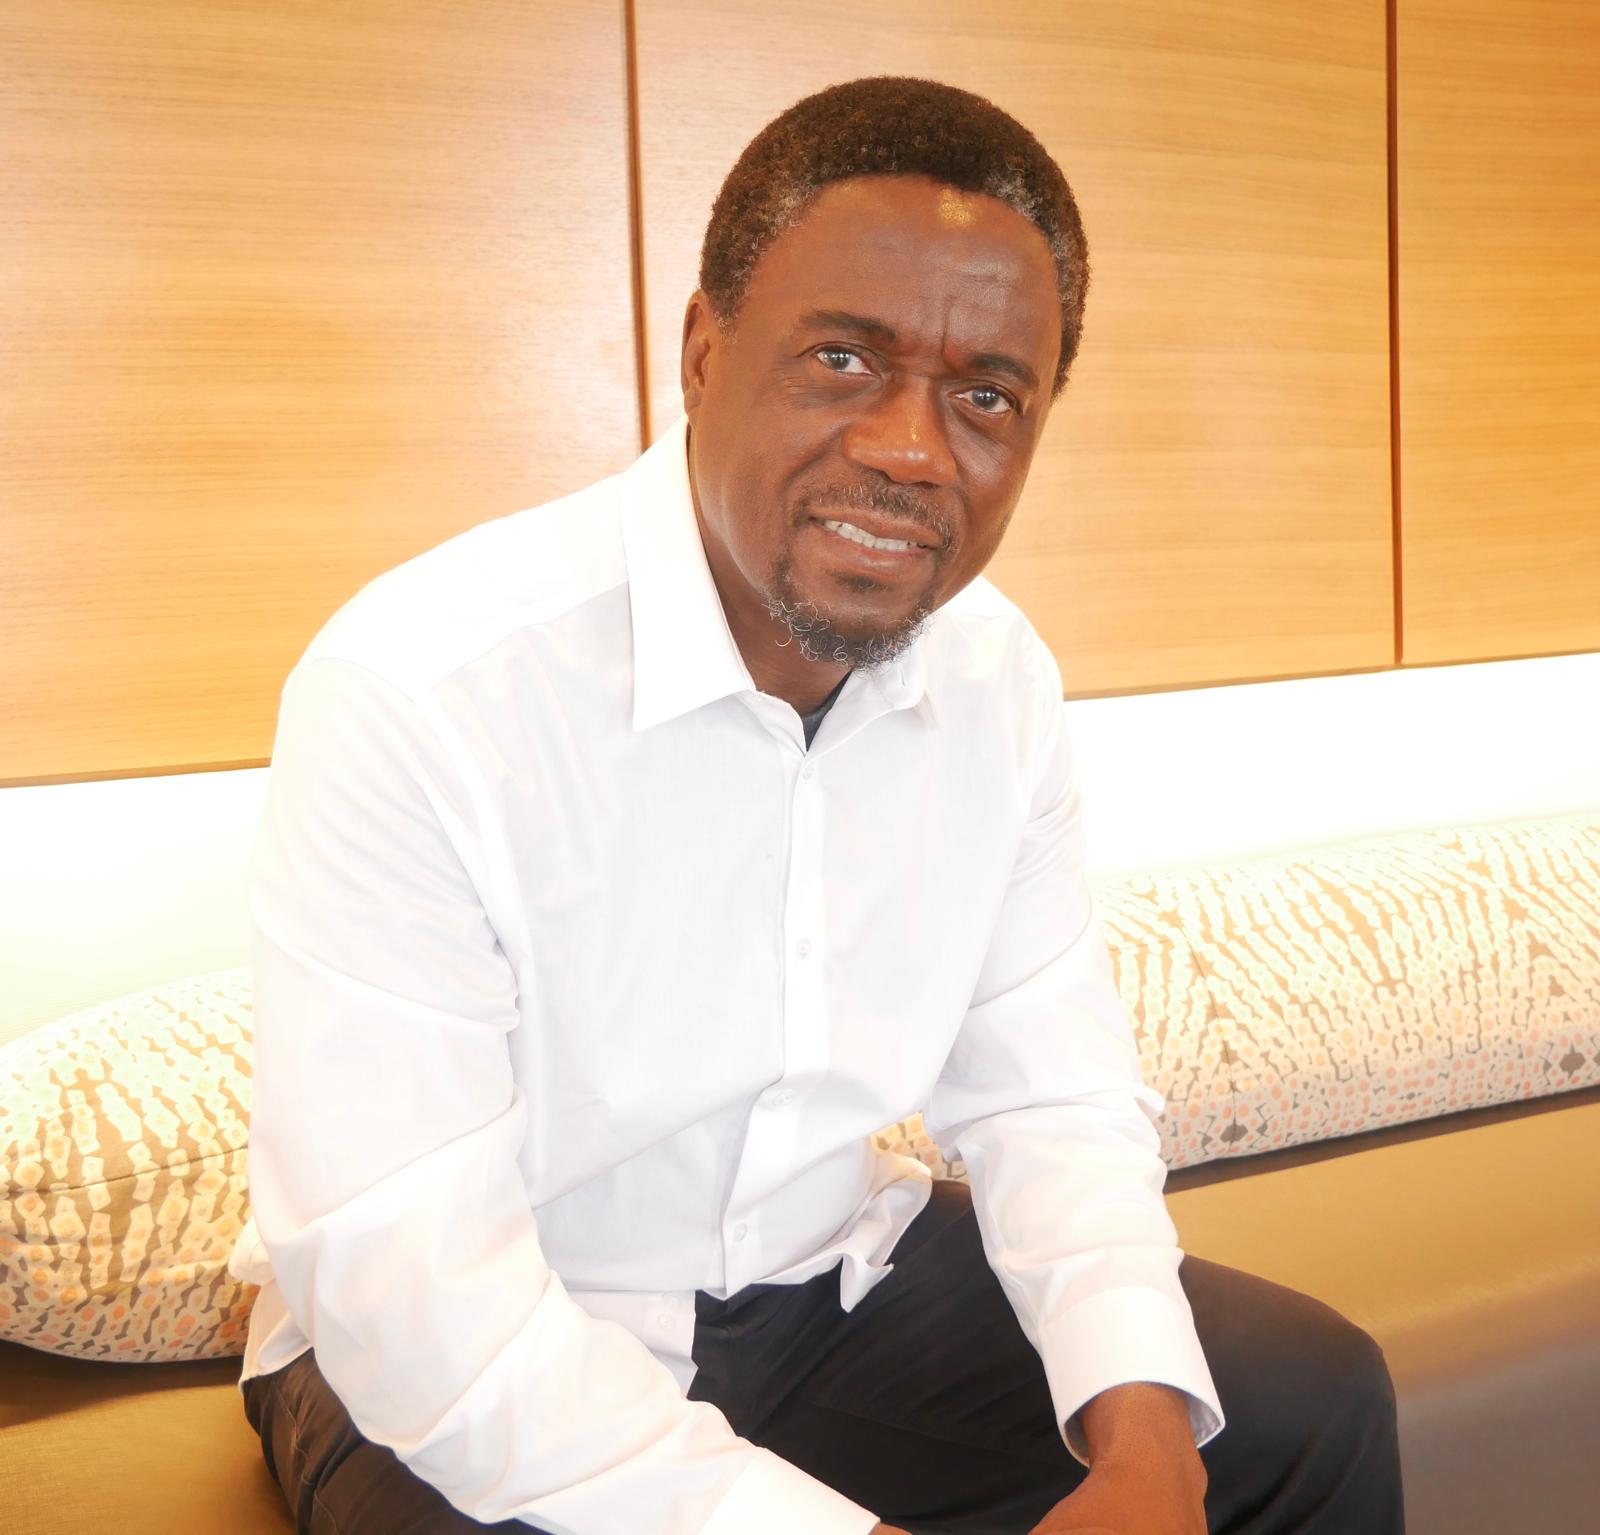 Dr. Valentine Obi, Founder & Group CEO, eTranzact